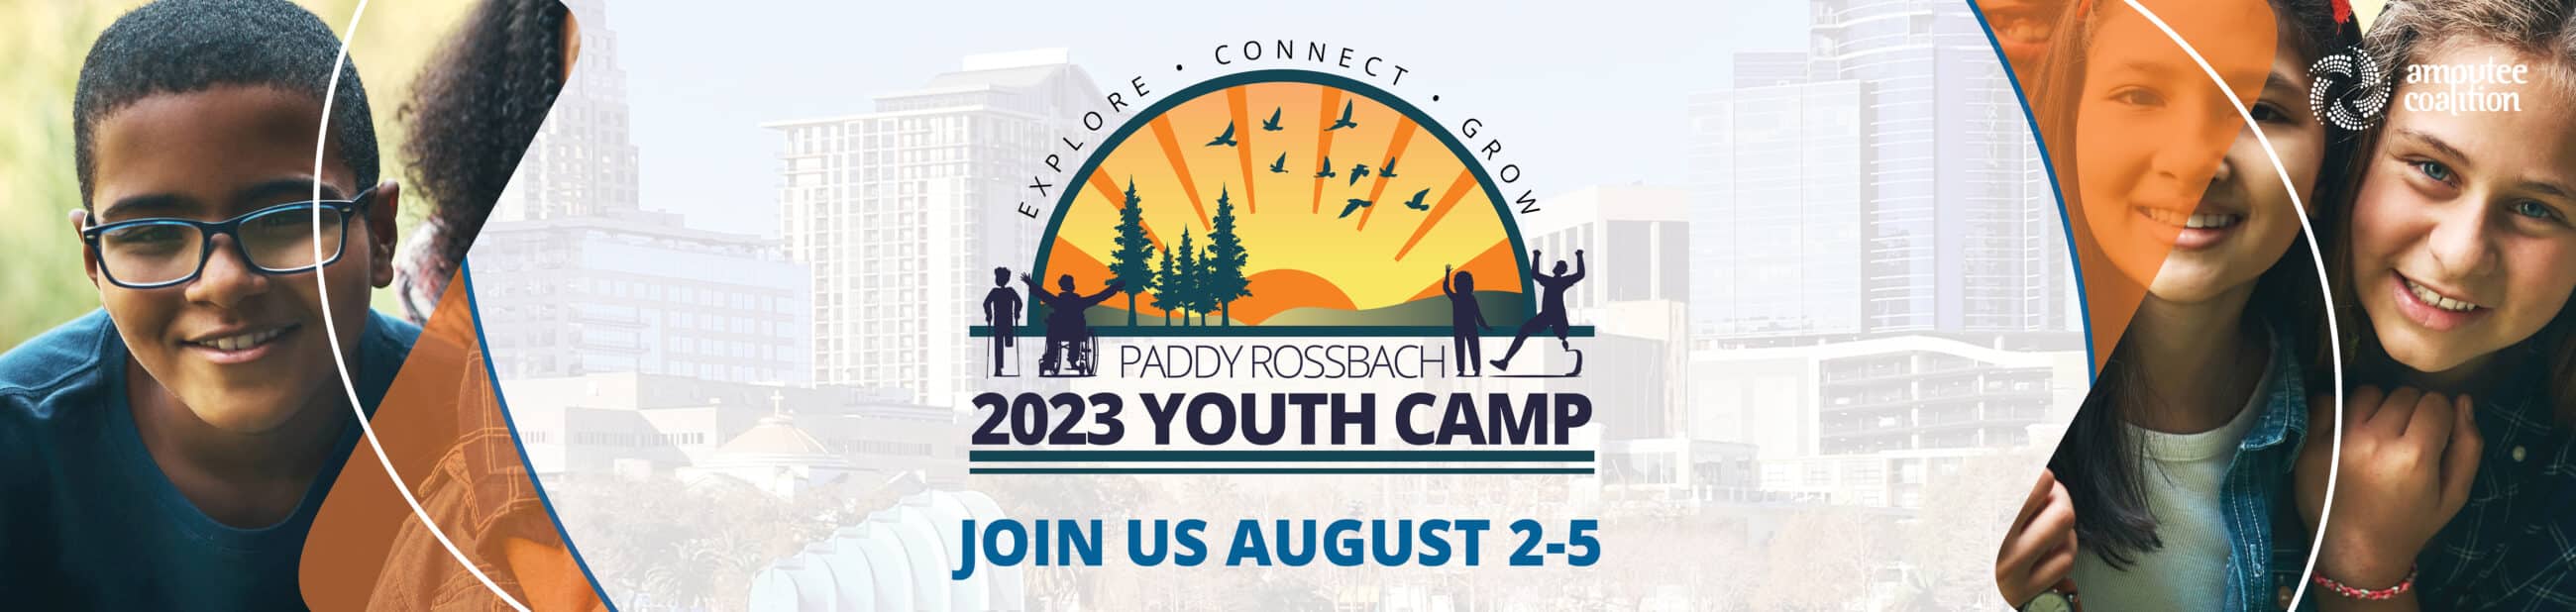 Join us August 2-5 for the 2023 Paddy Rossbach Youth Camp. Explore. Connect. Grow.